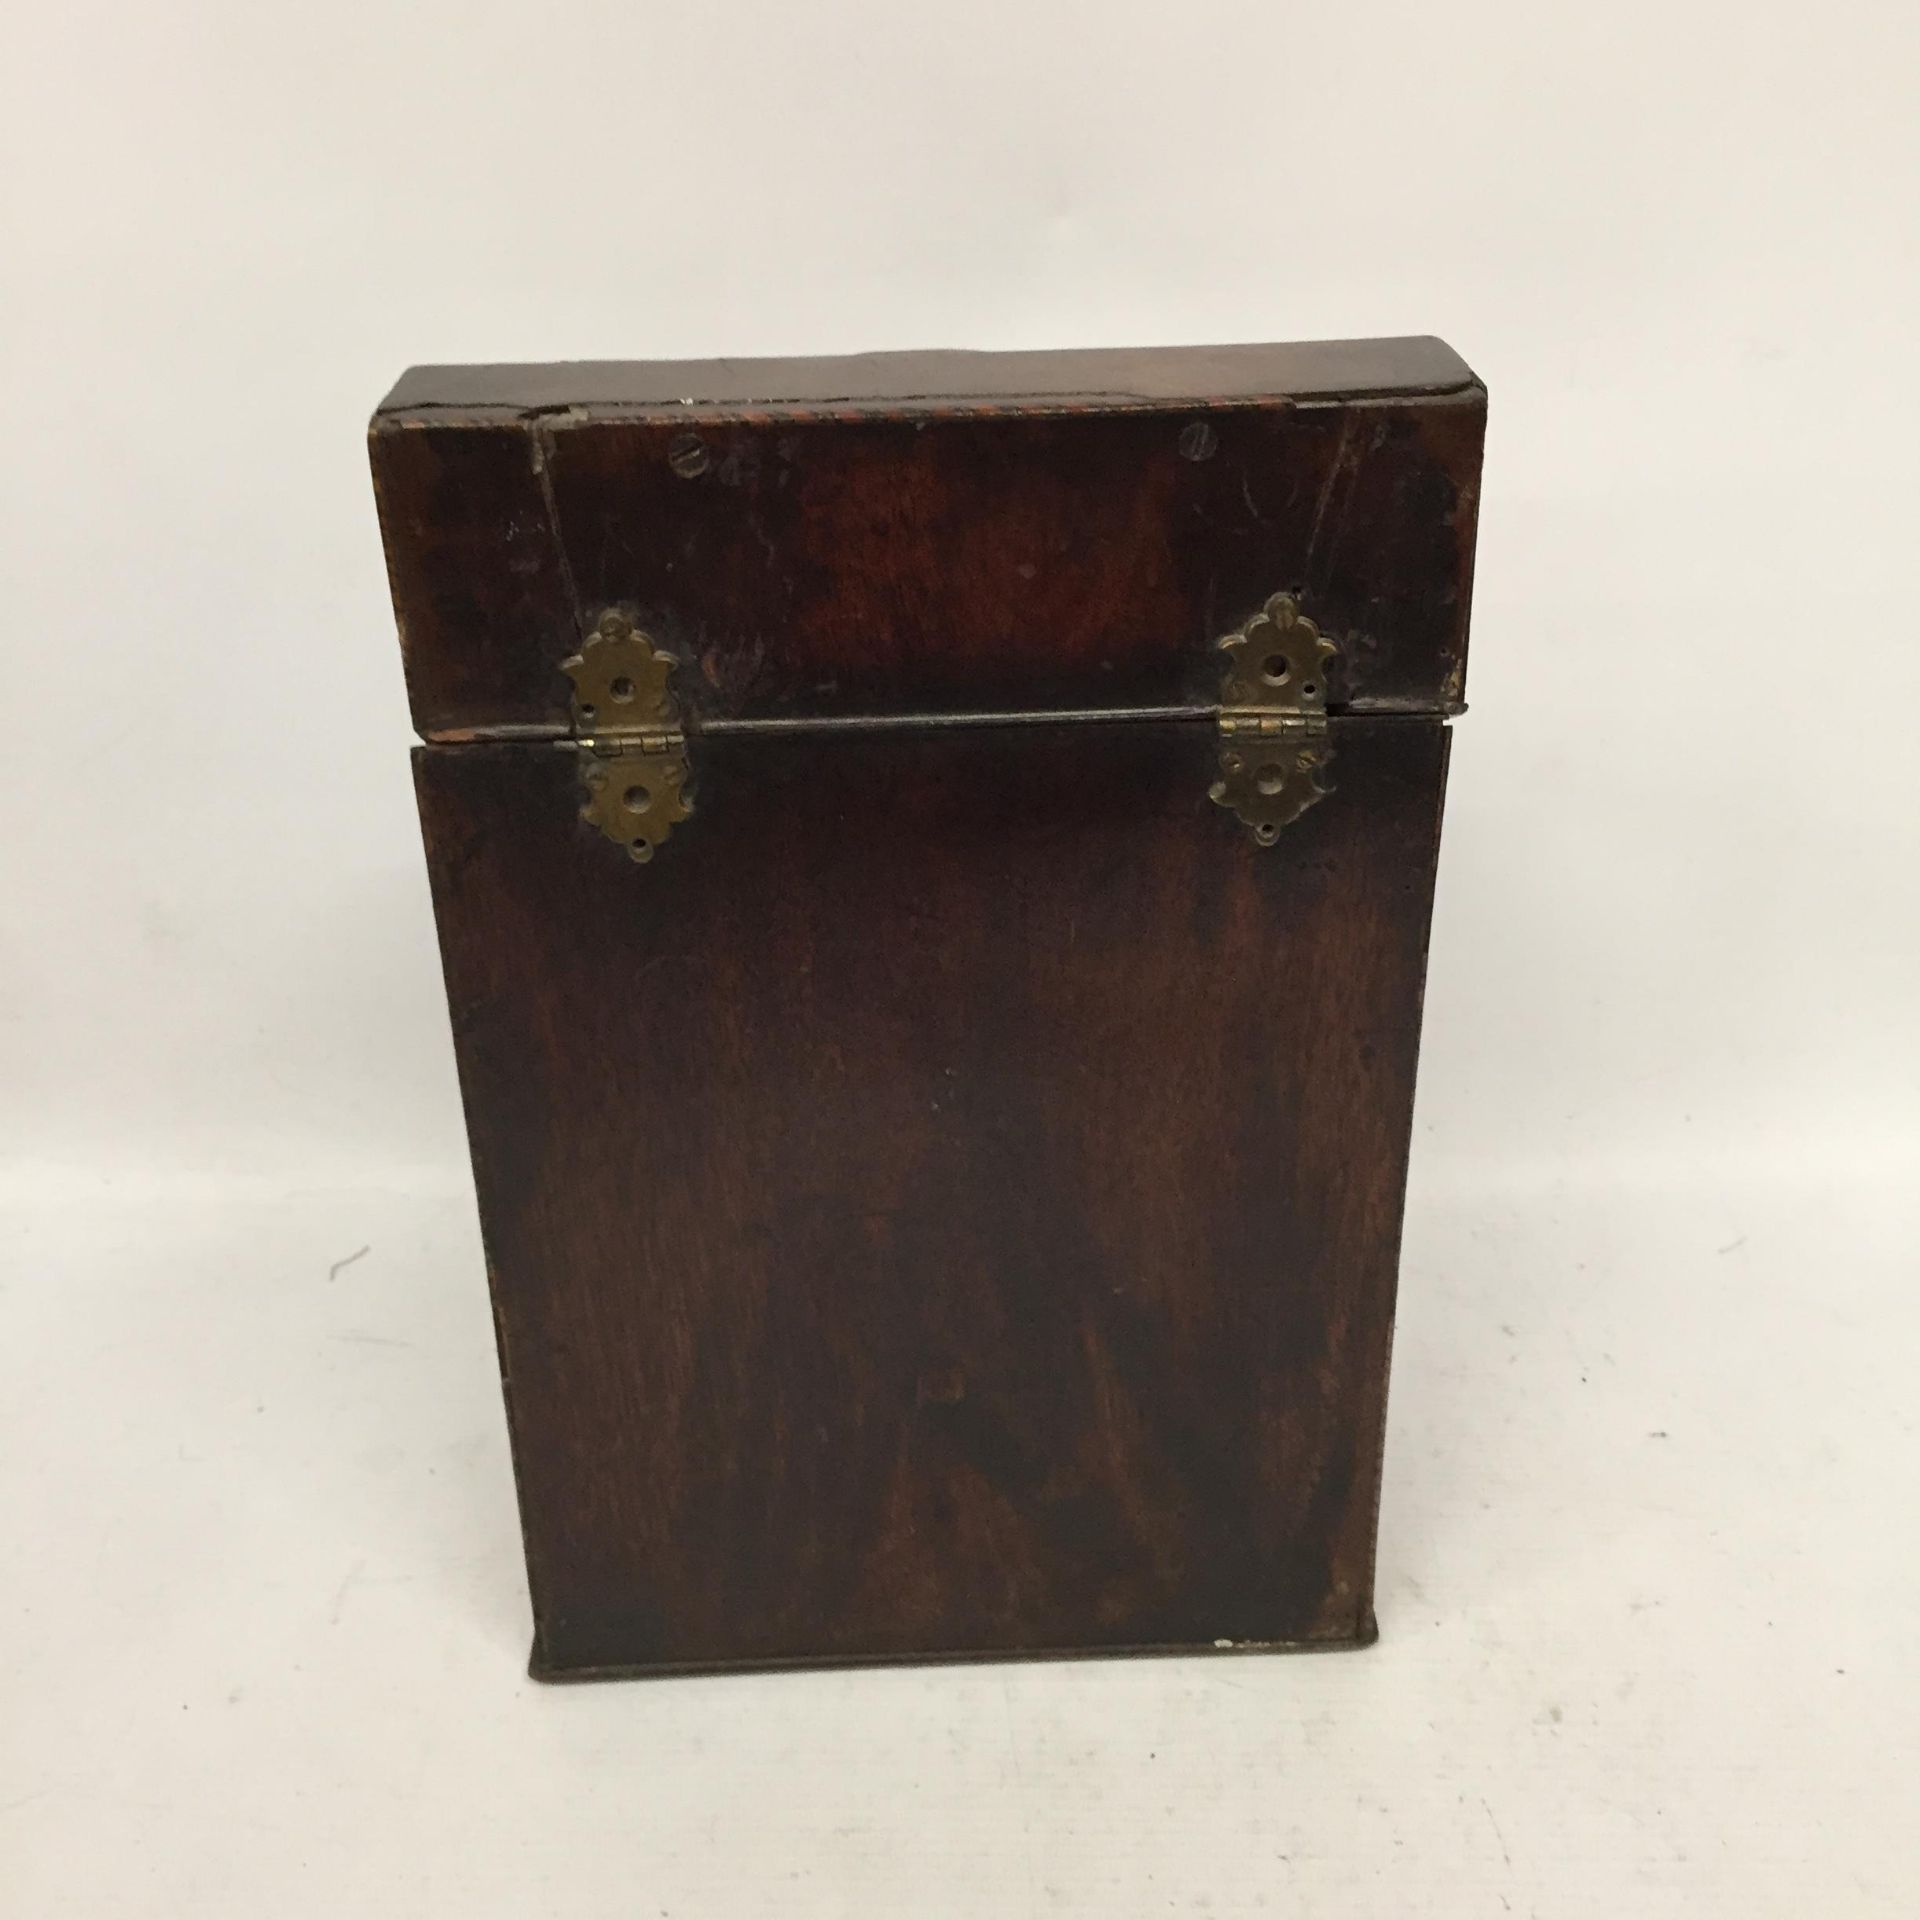 A GEORGIAN MAHOGANY KNIFE BOX WITH BRASS FITTINGS - Image 4 of 4